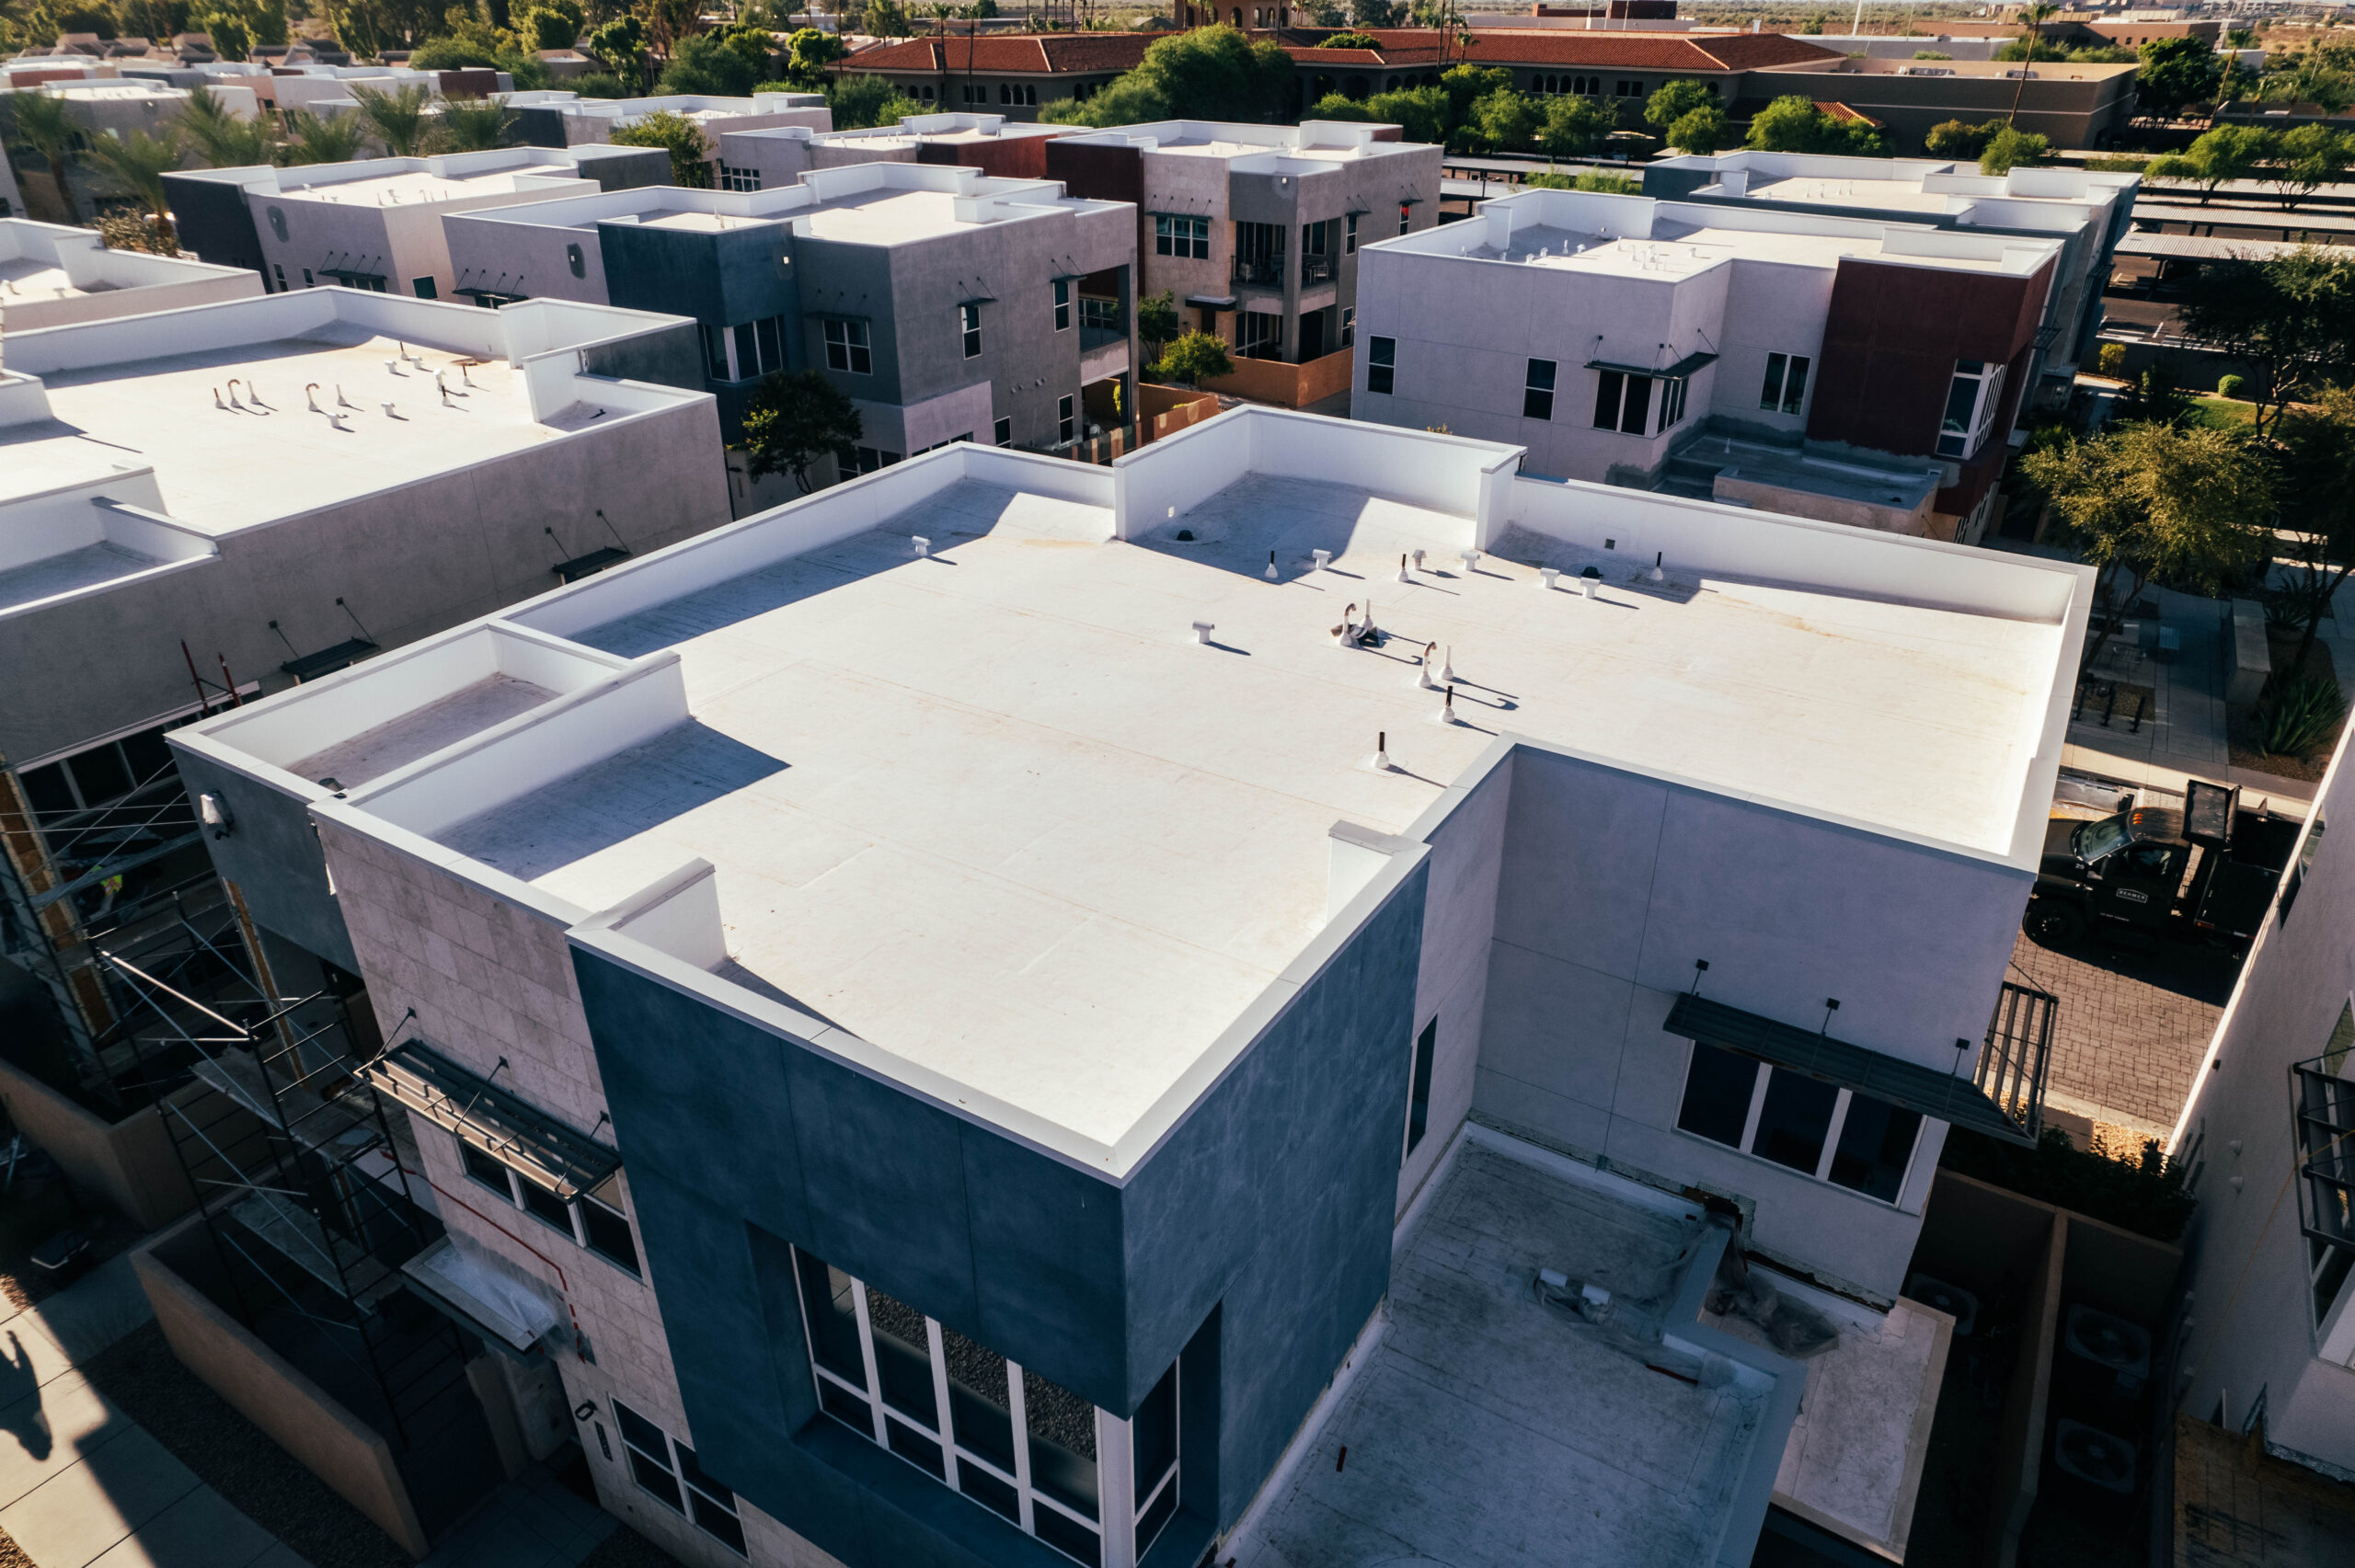 Apartment complex in Paradise Valley after recent foam roof coating application.